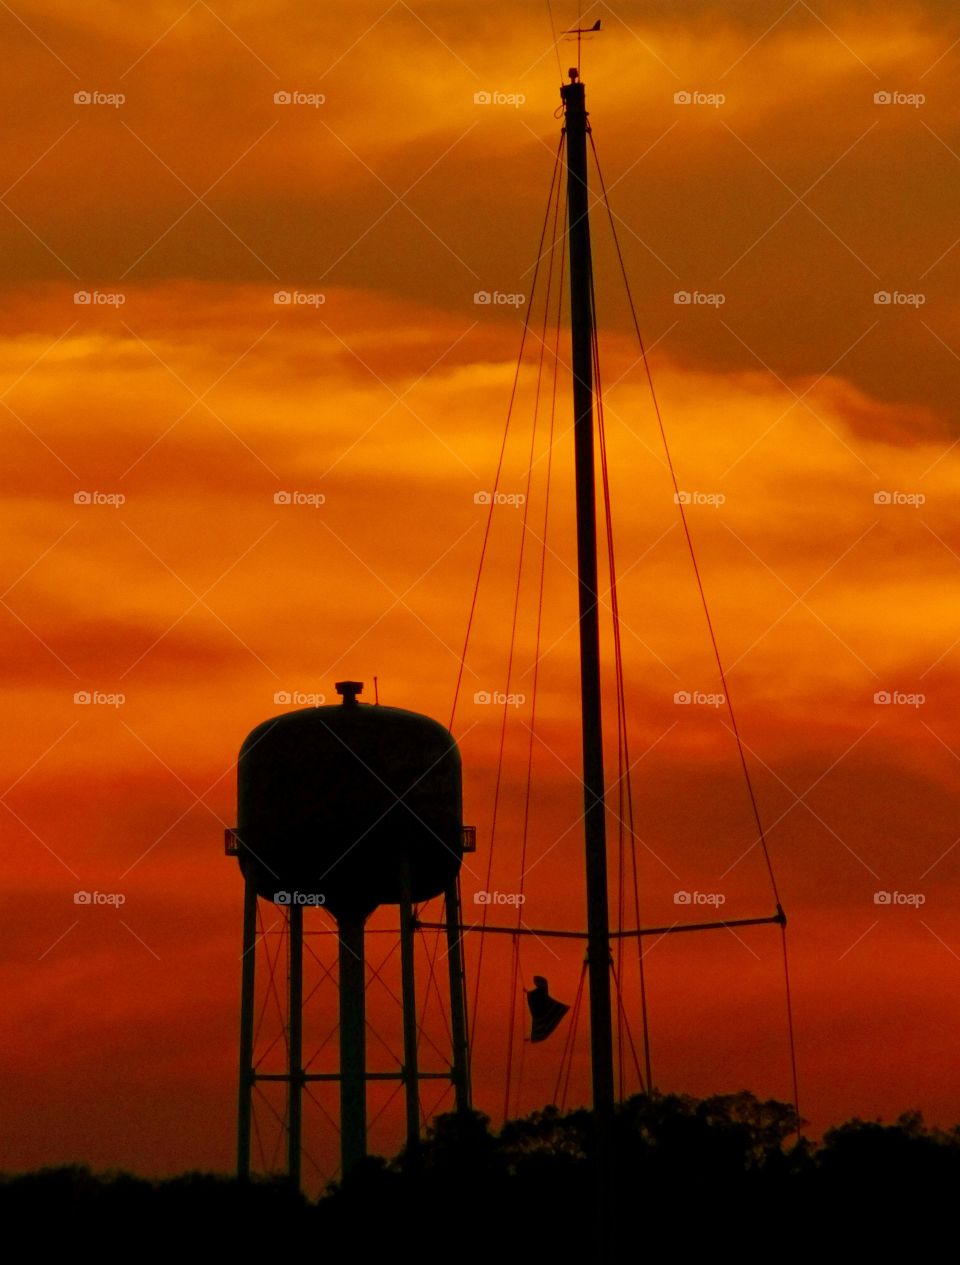 A water tower silhouette in the sunset